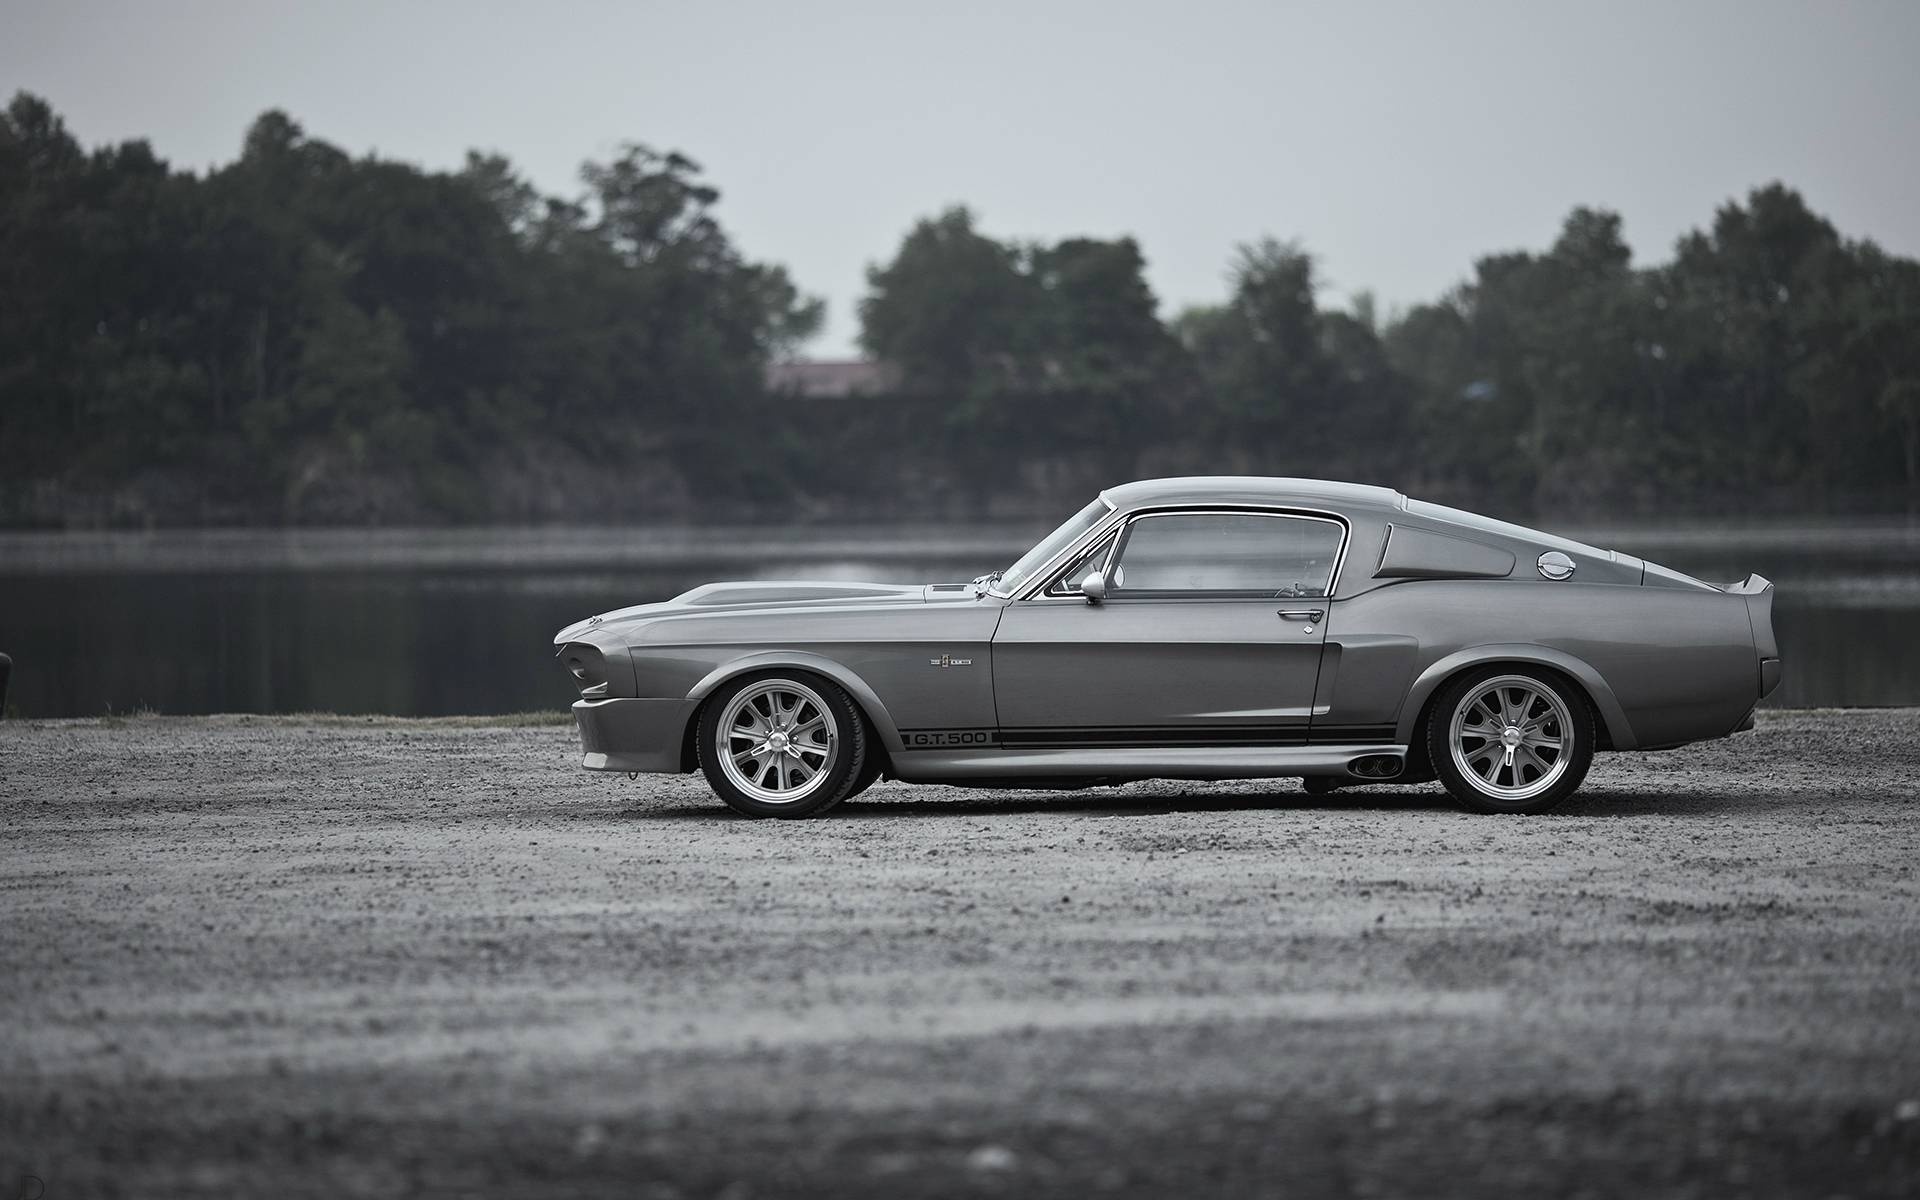 Shelby GT Eleanor, 1967 Mustang classic, Muscle car design, Performance vehicle, Automotive icon, 1920x1200 HD Desktop